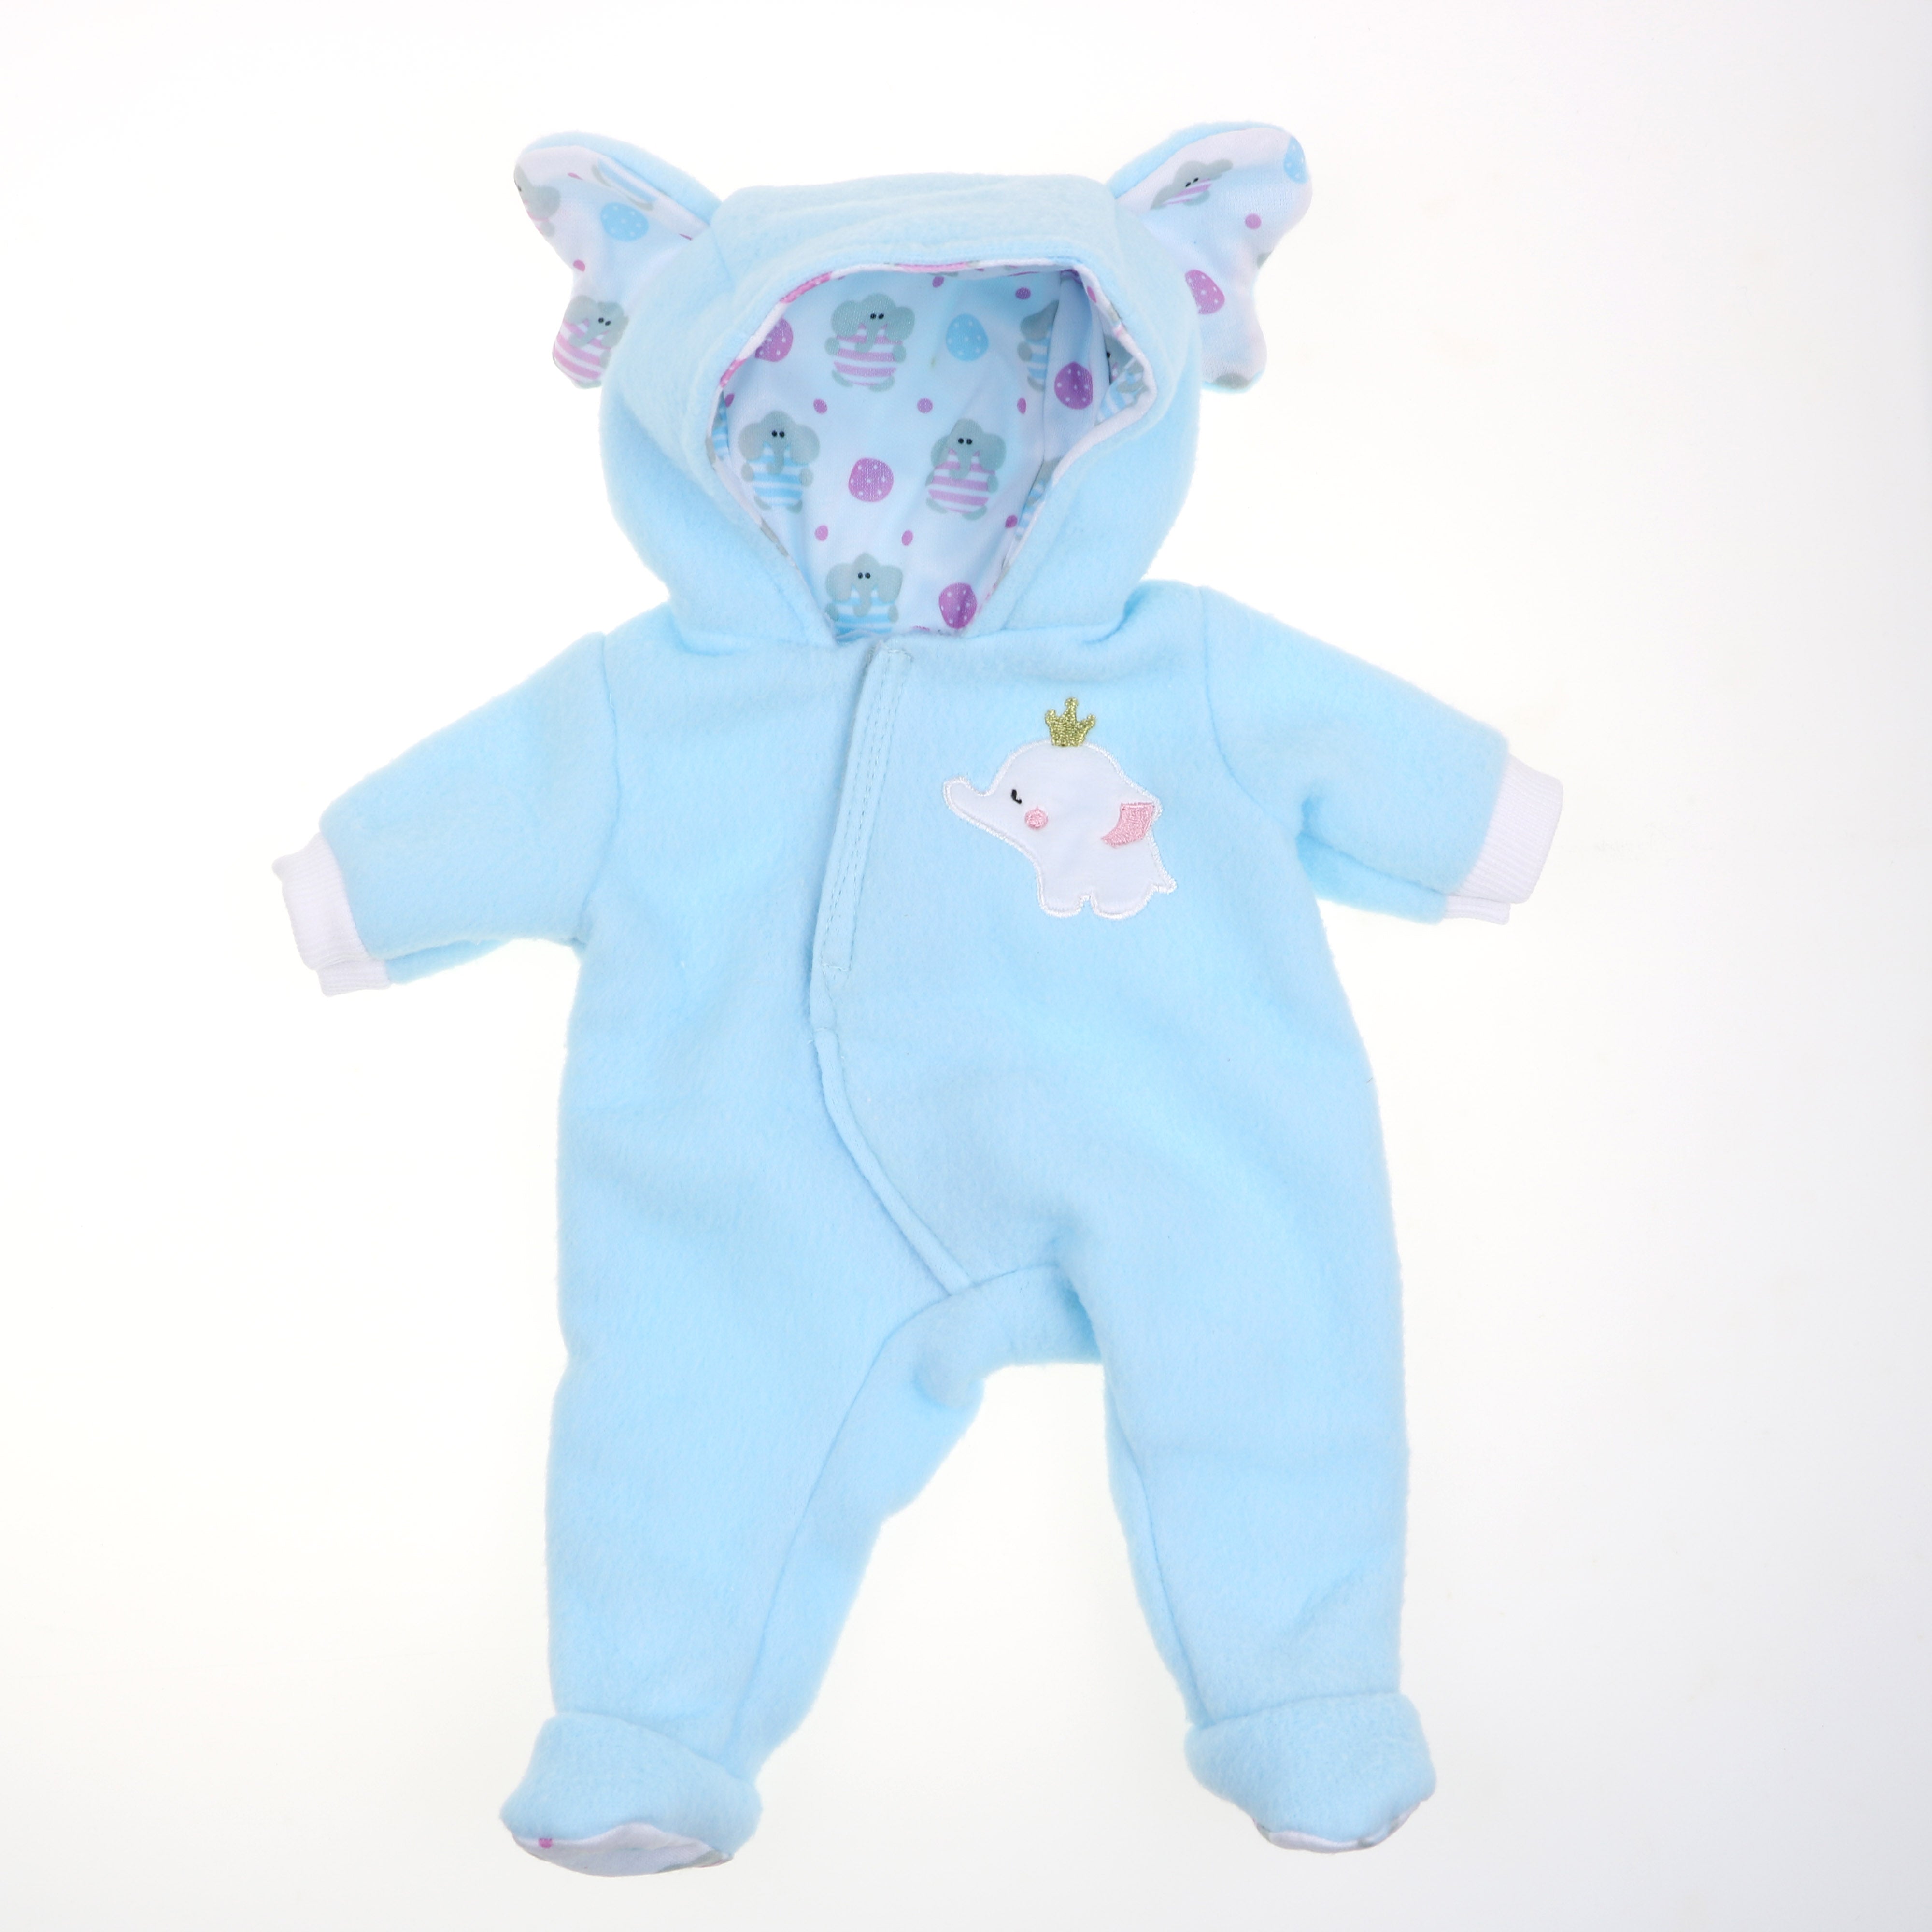 Doll Clothes Superstore Stuffed Animal Clothes of Pink and Blue